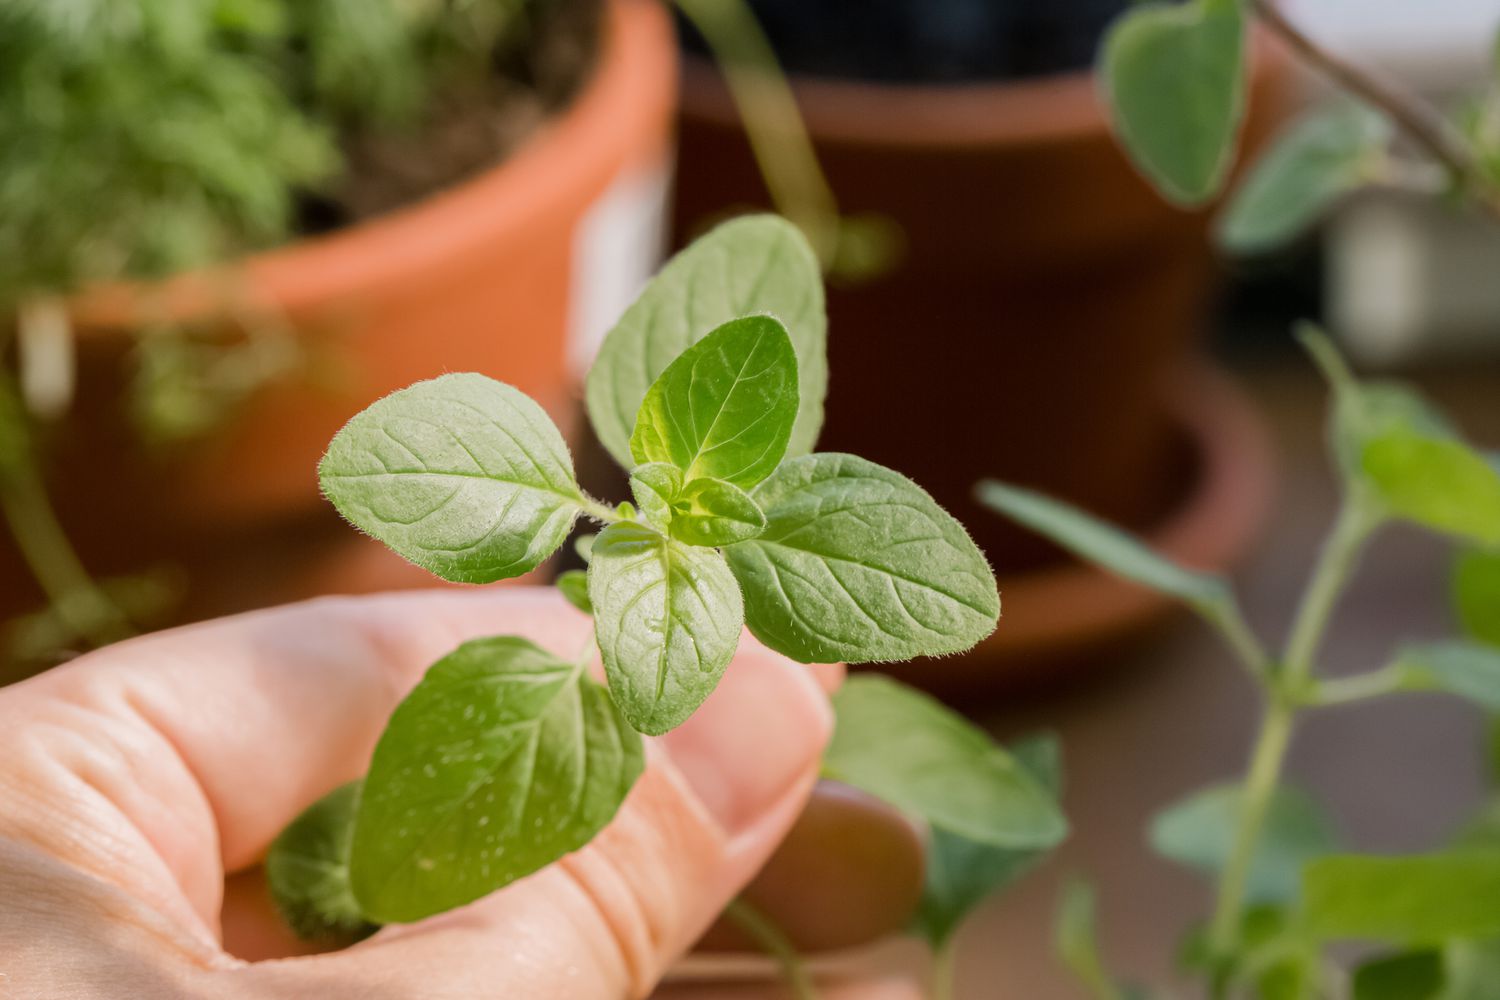 How To Harvest Oregano Without Killing The Plant